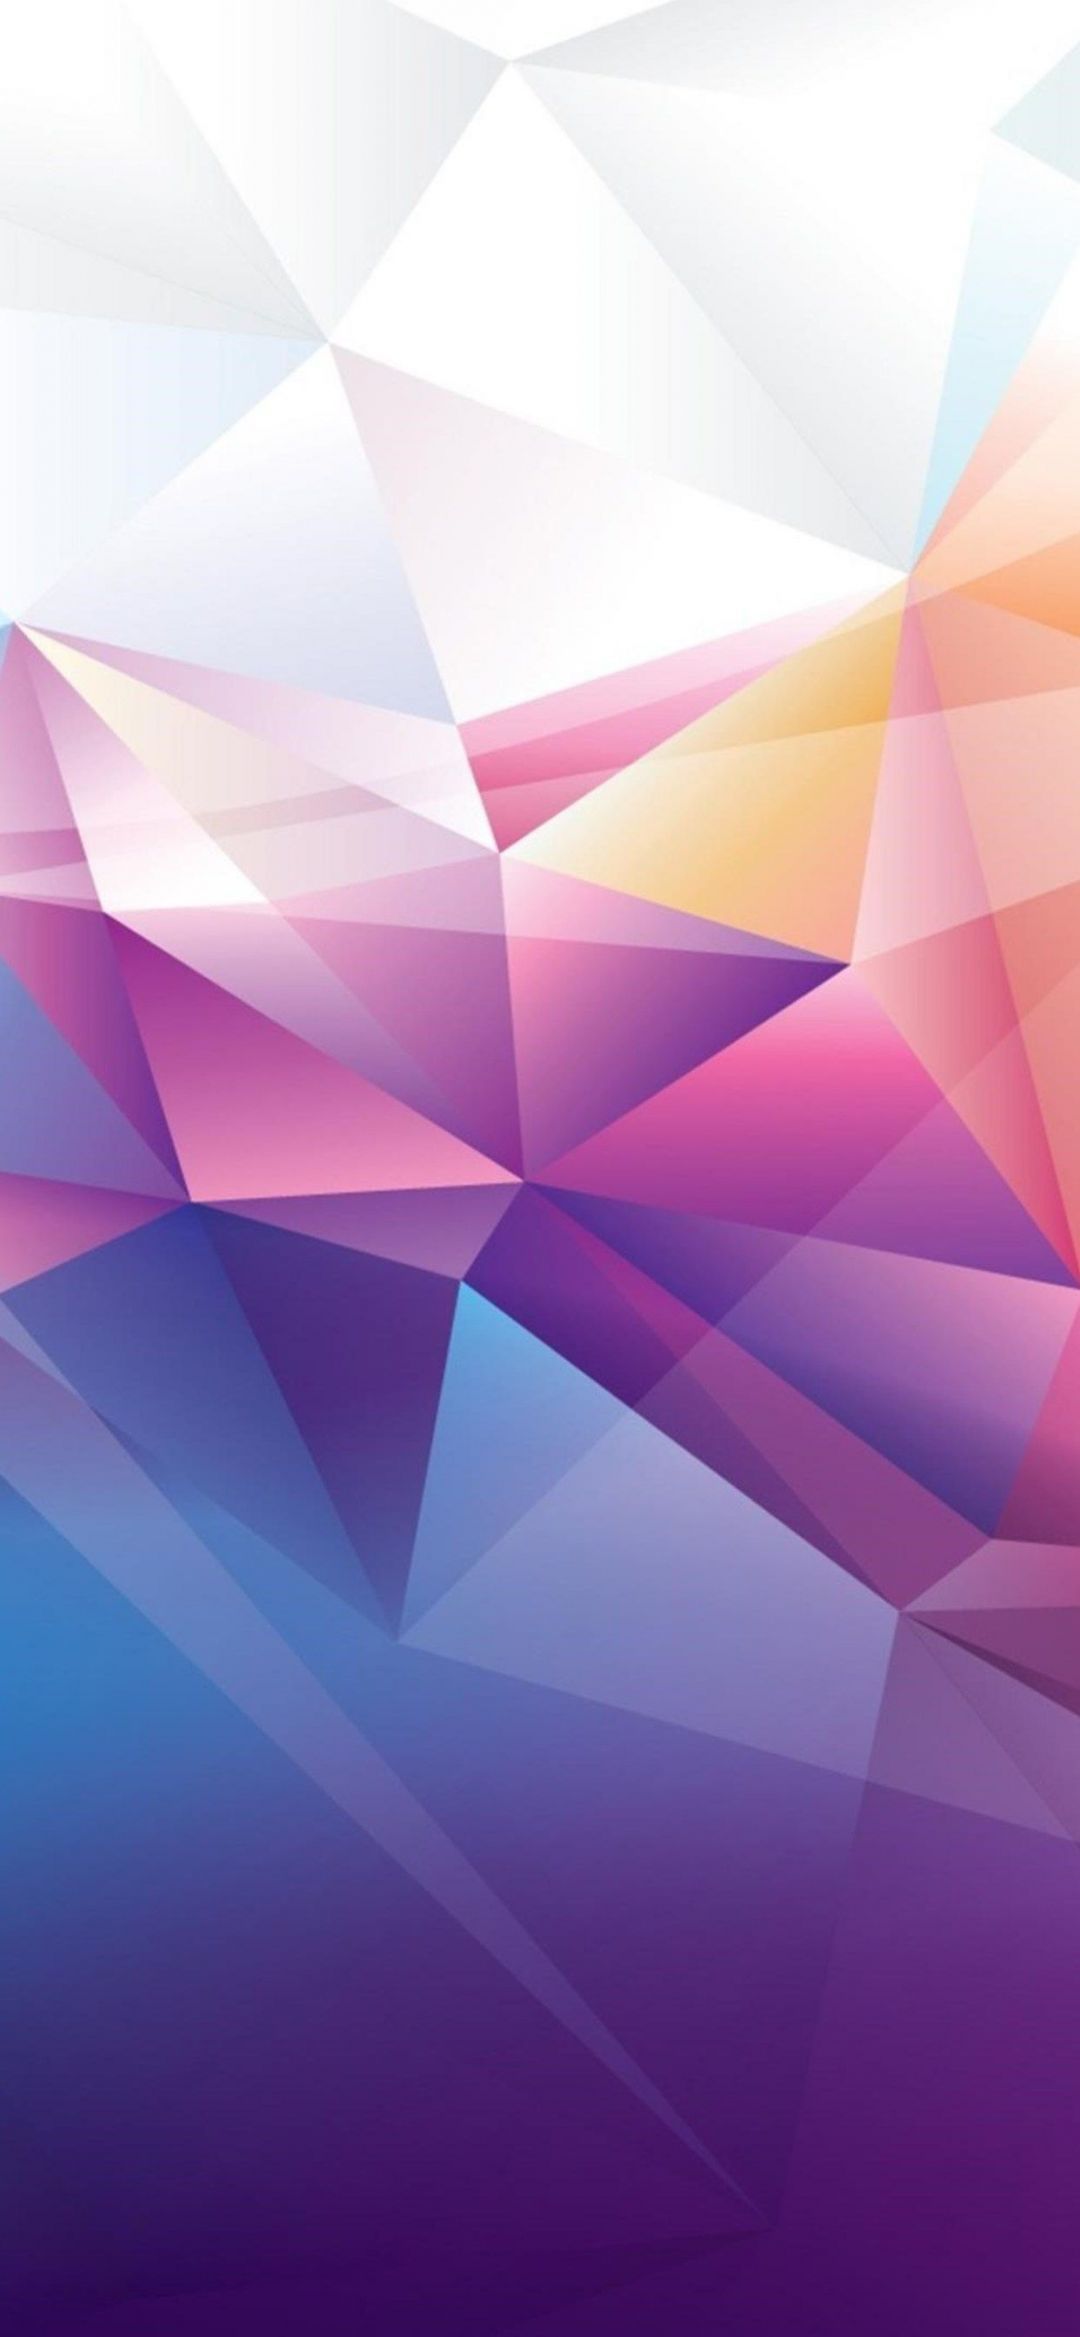 Colorful Polygon HD Wallpaper (Desktop Background / Android / iPhone) (1080p, 4k) (1242x2688) (2021)